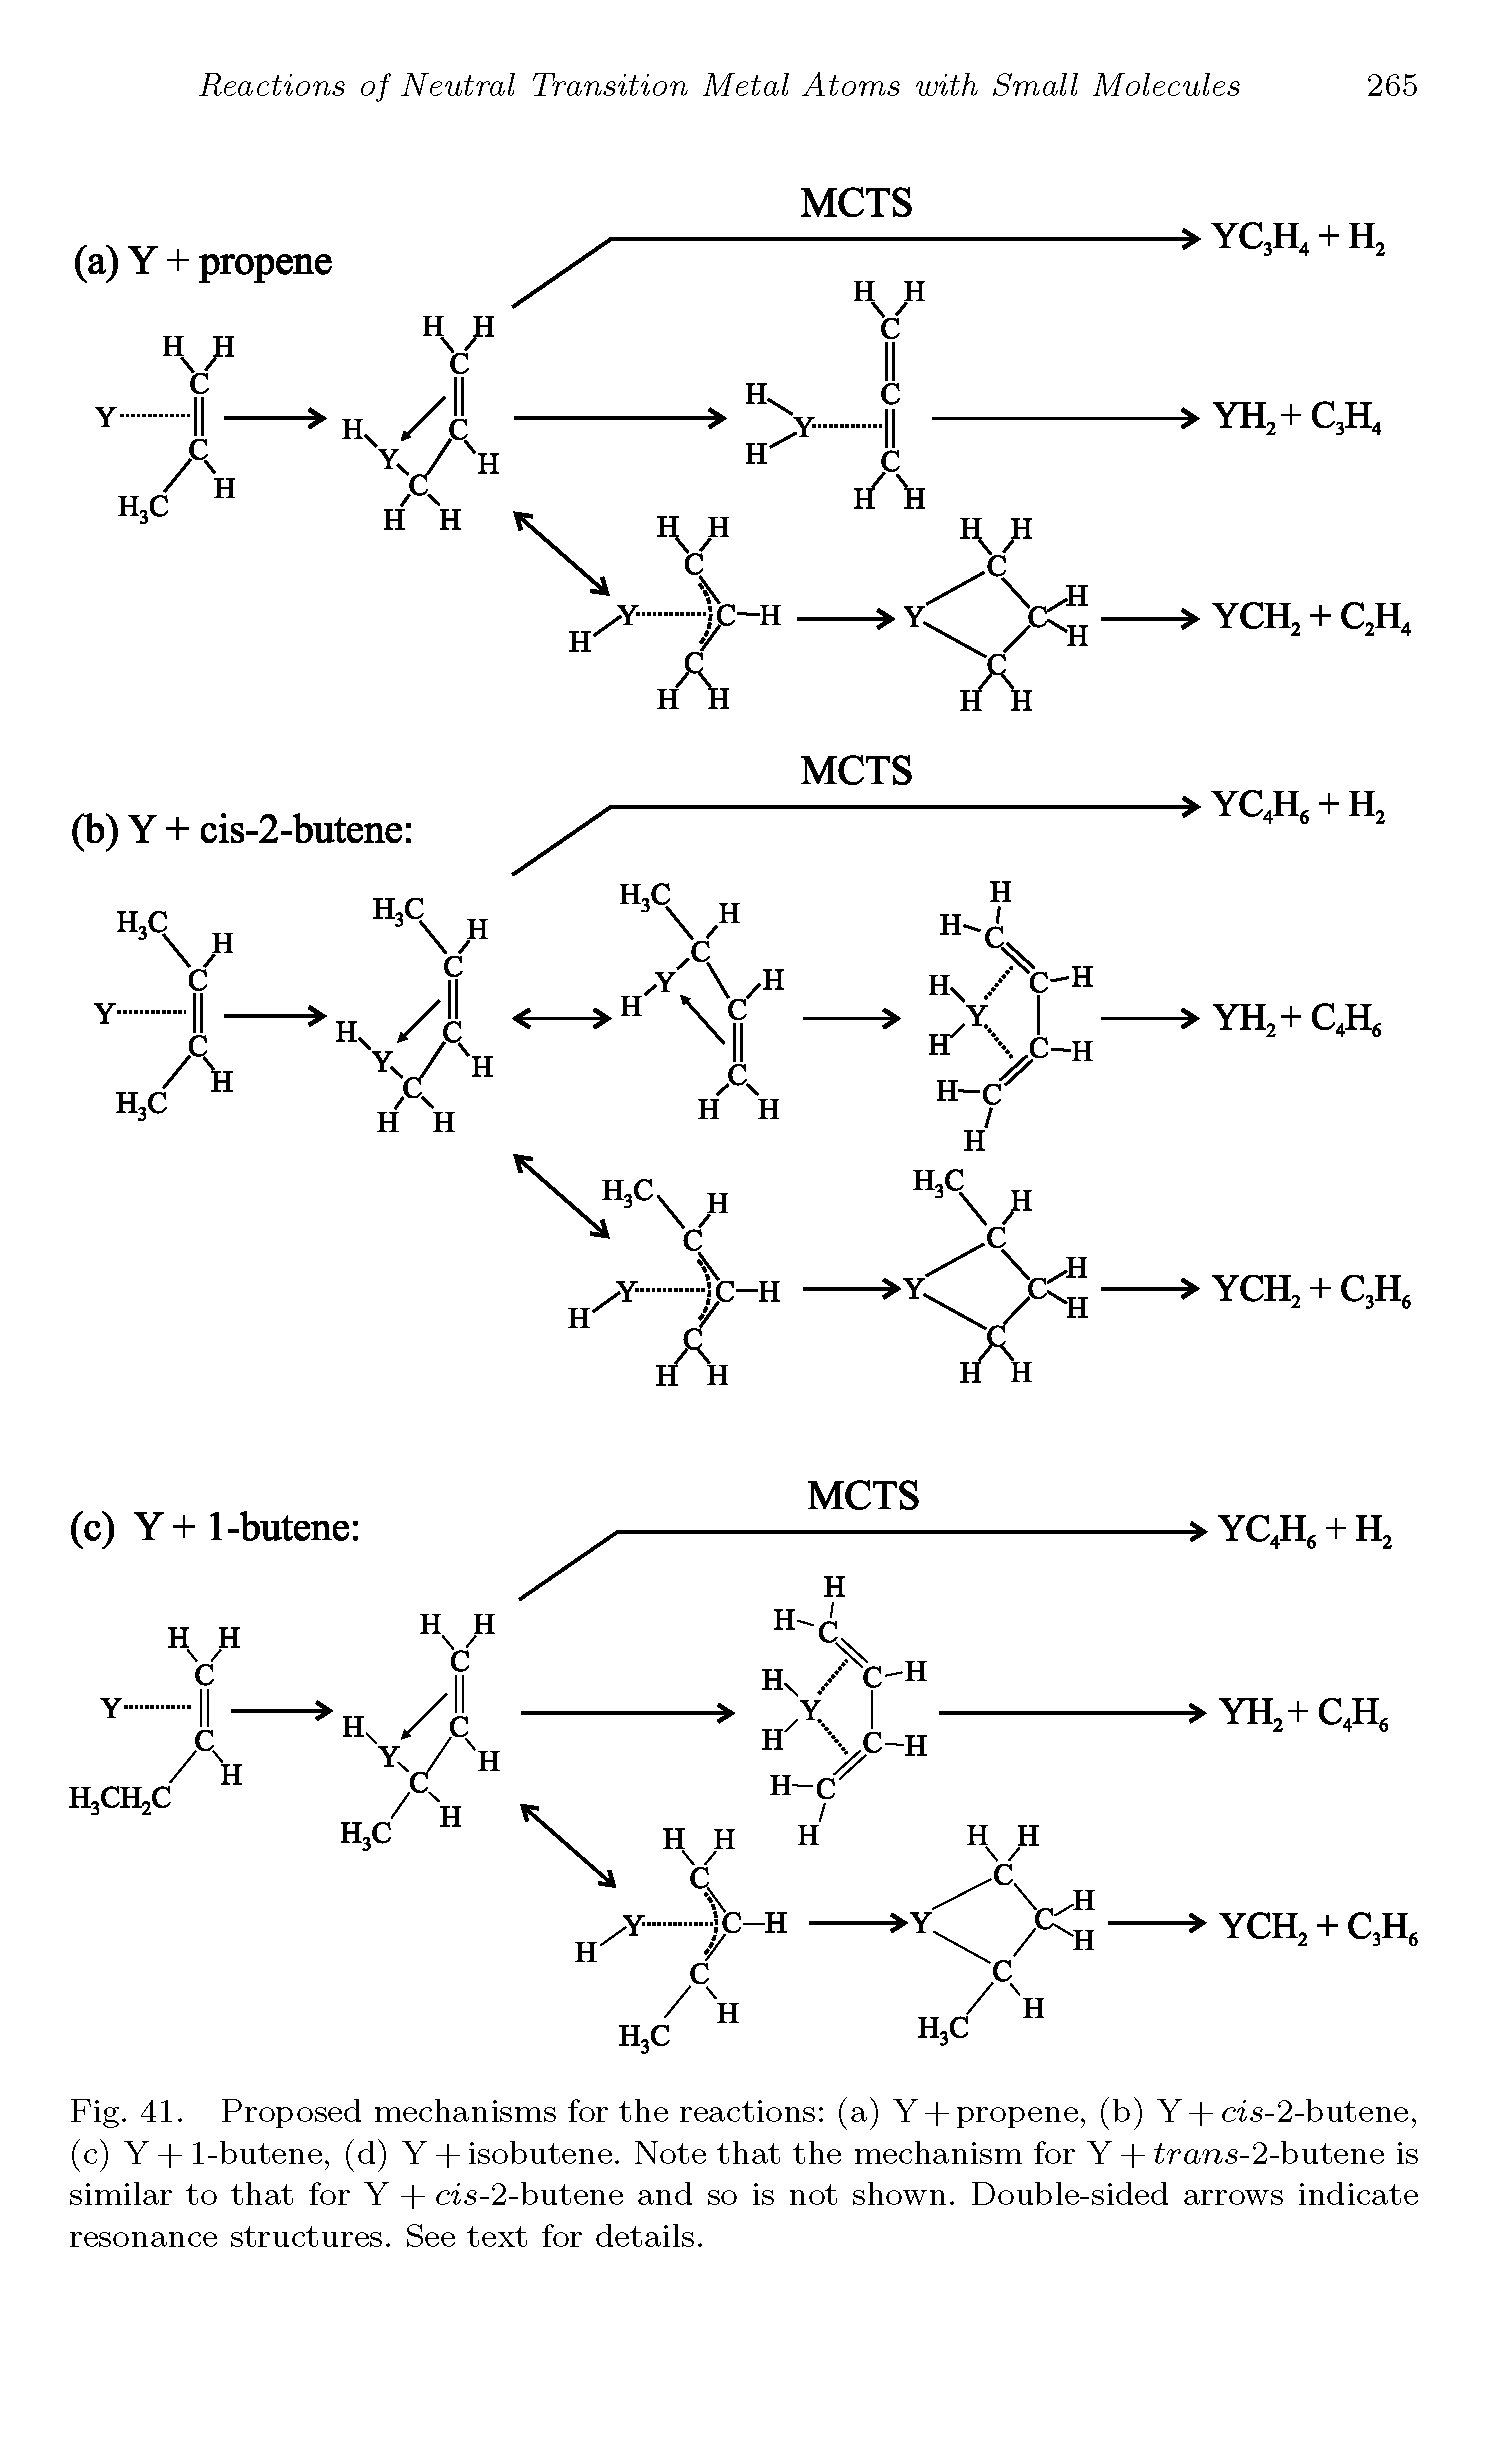 Fig. 41. Proposed mechanisms for the reactions (a) Y + propene, (b) Y + cis-2-butene, (c) Y + 1-butene, (d) Y + isobutene. Note that the mechanism for Y + trans-2-butene is similar to that for Y + cis-2-butene and so is not shown. Double-sided arrows indicate resonance structures. See text for details.